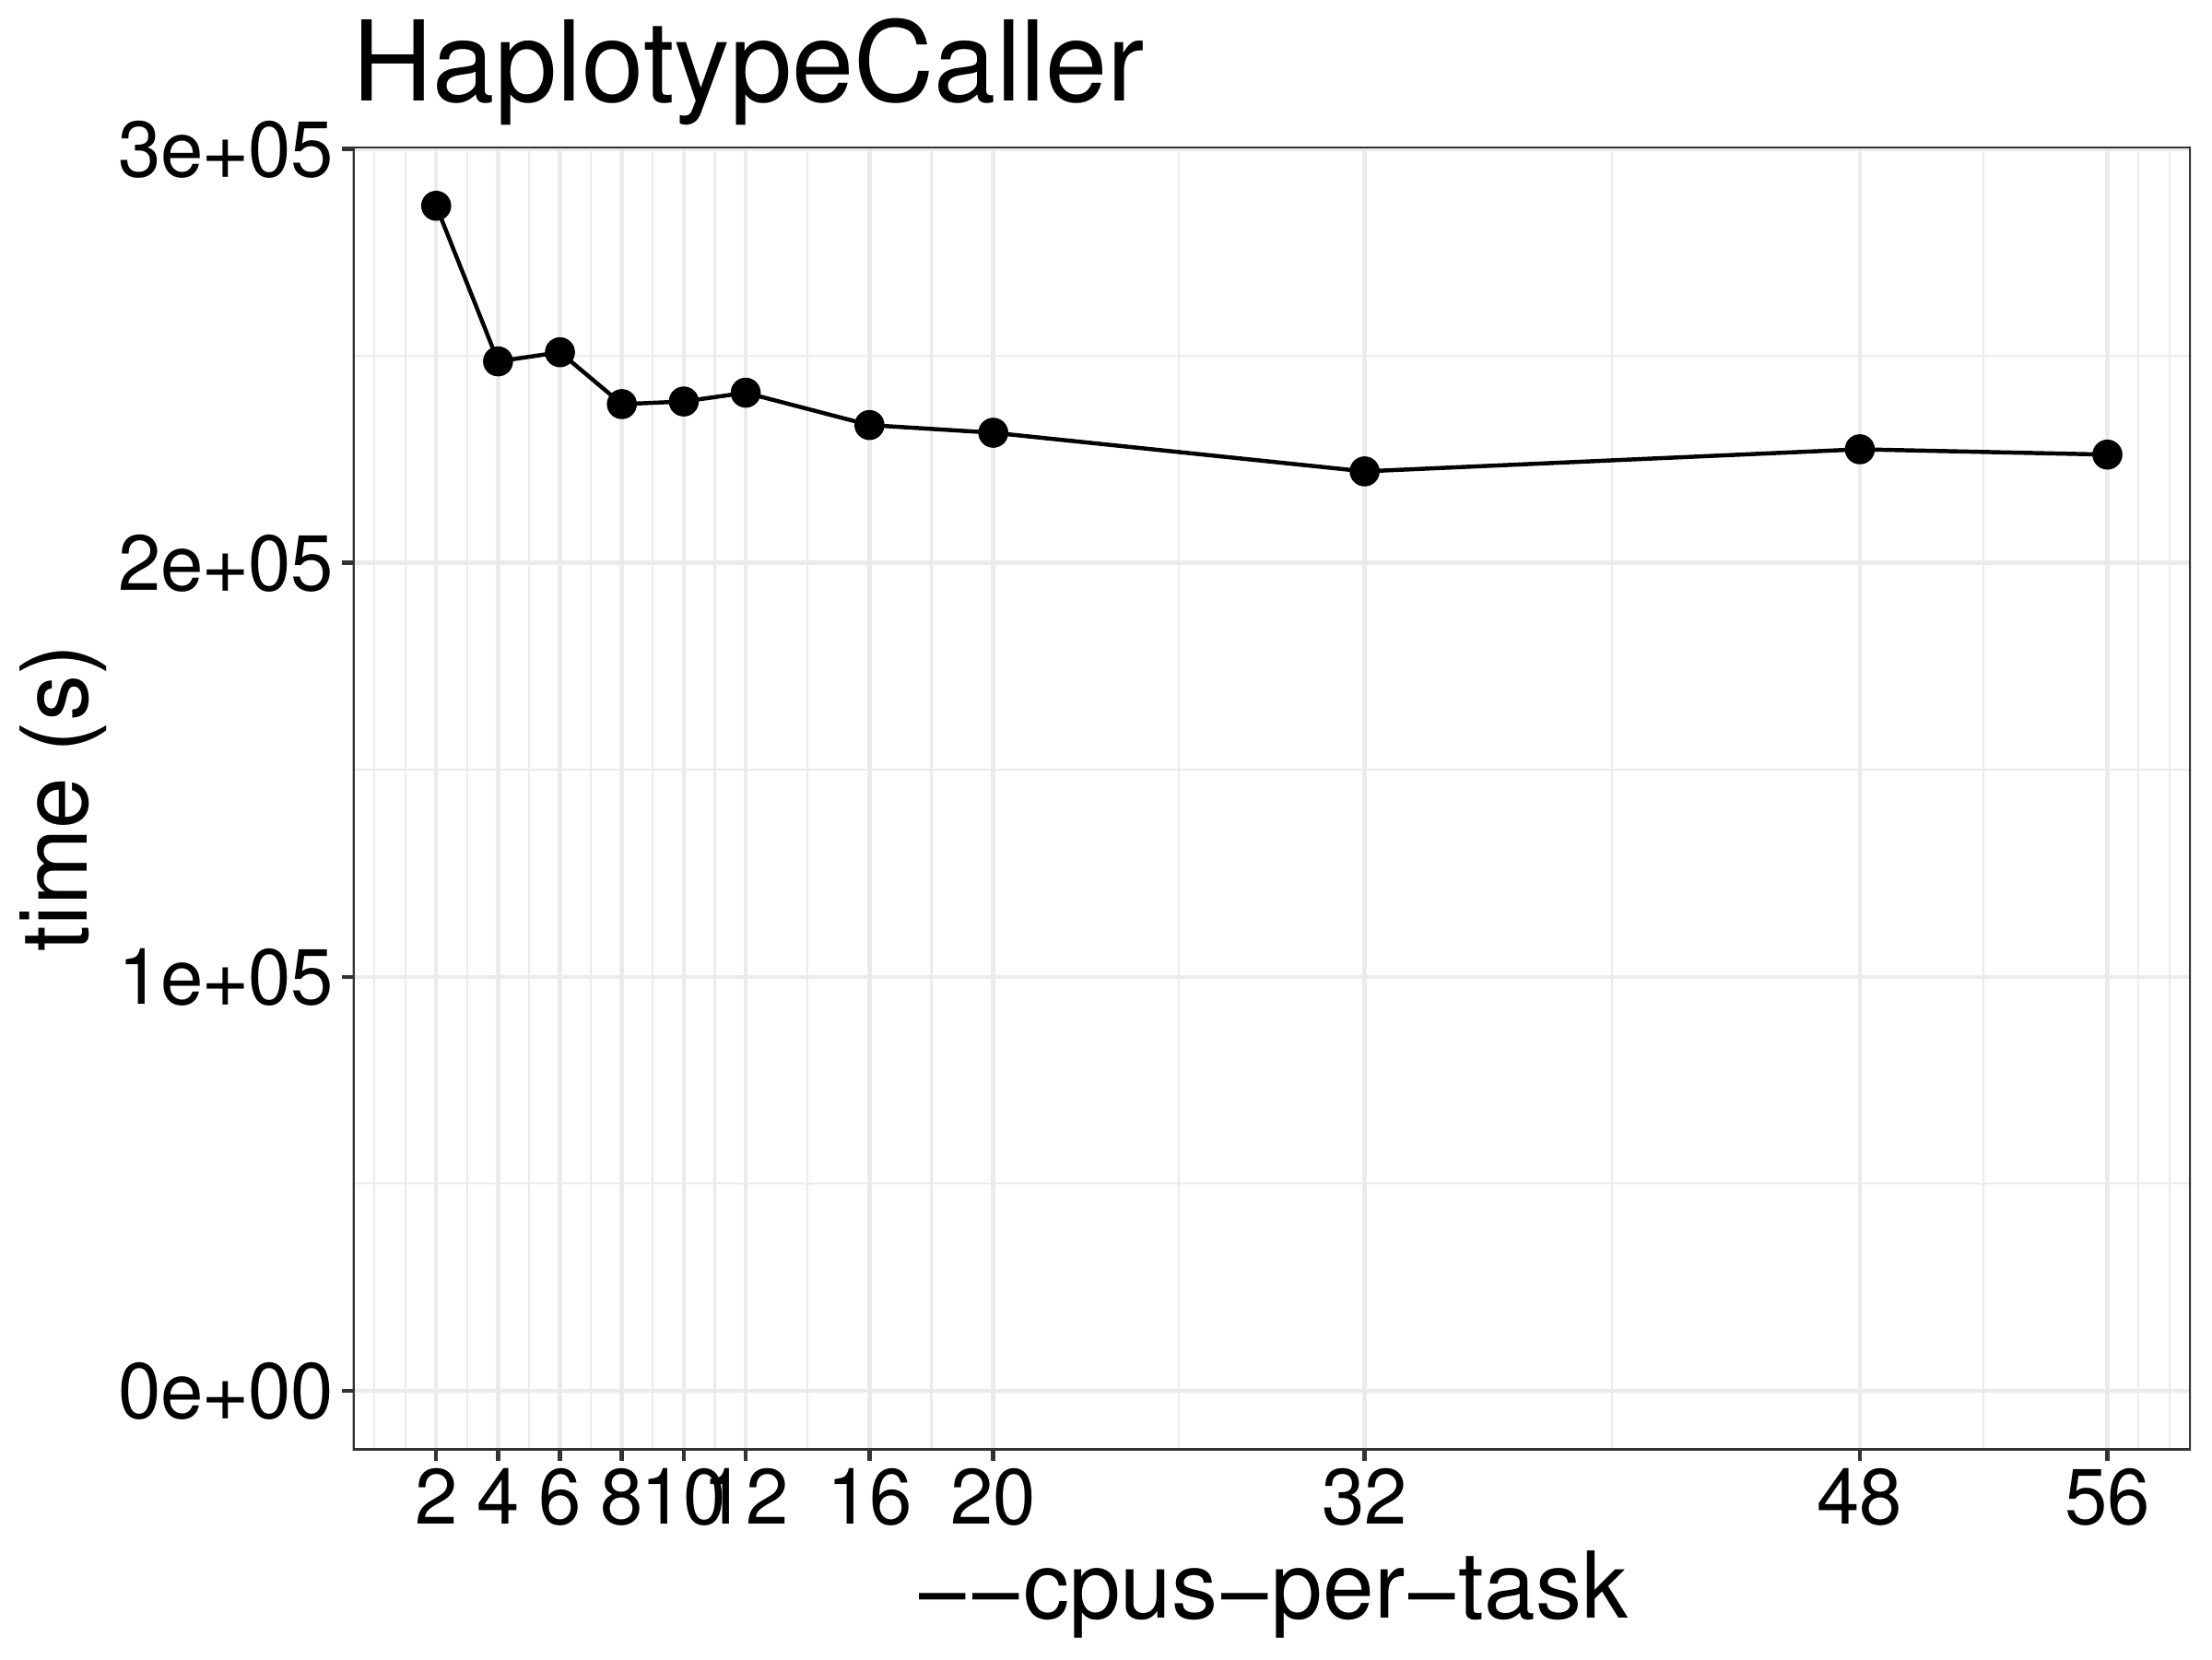 Runtime of HaplotypeCaller as a function of the number of threads